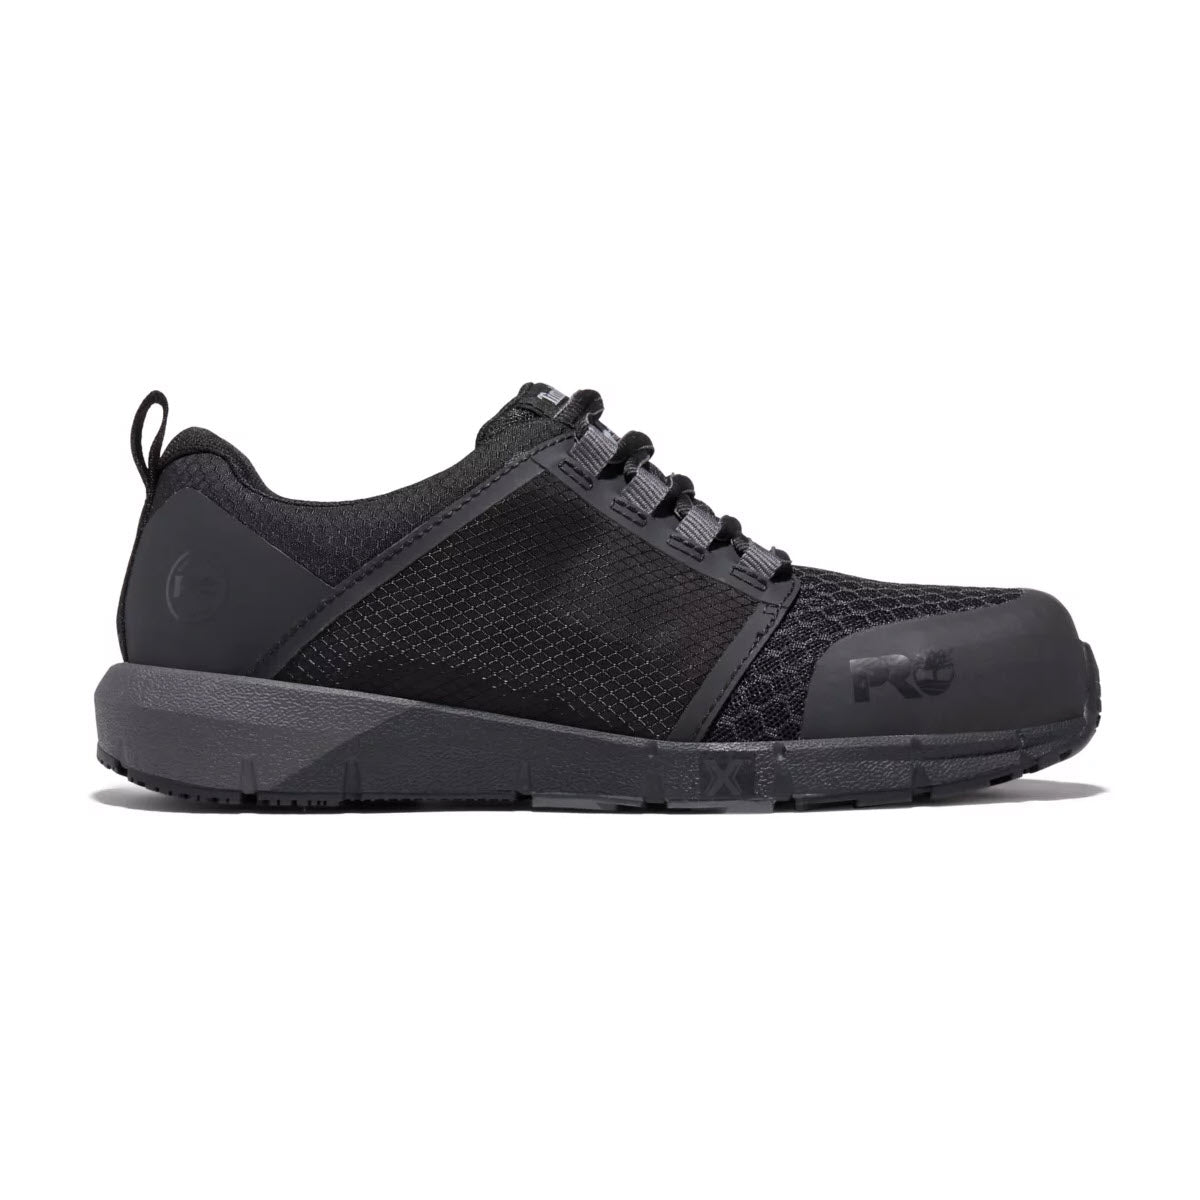 Timberland black athletic composite-toe work shoe with a textured upper and lace-up closure.